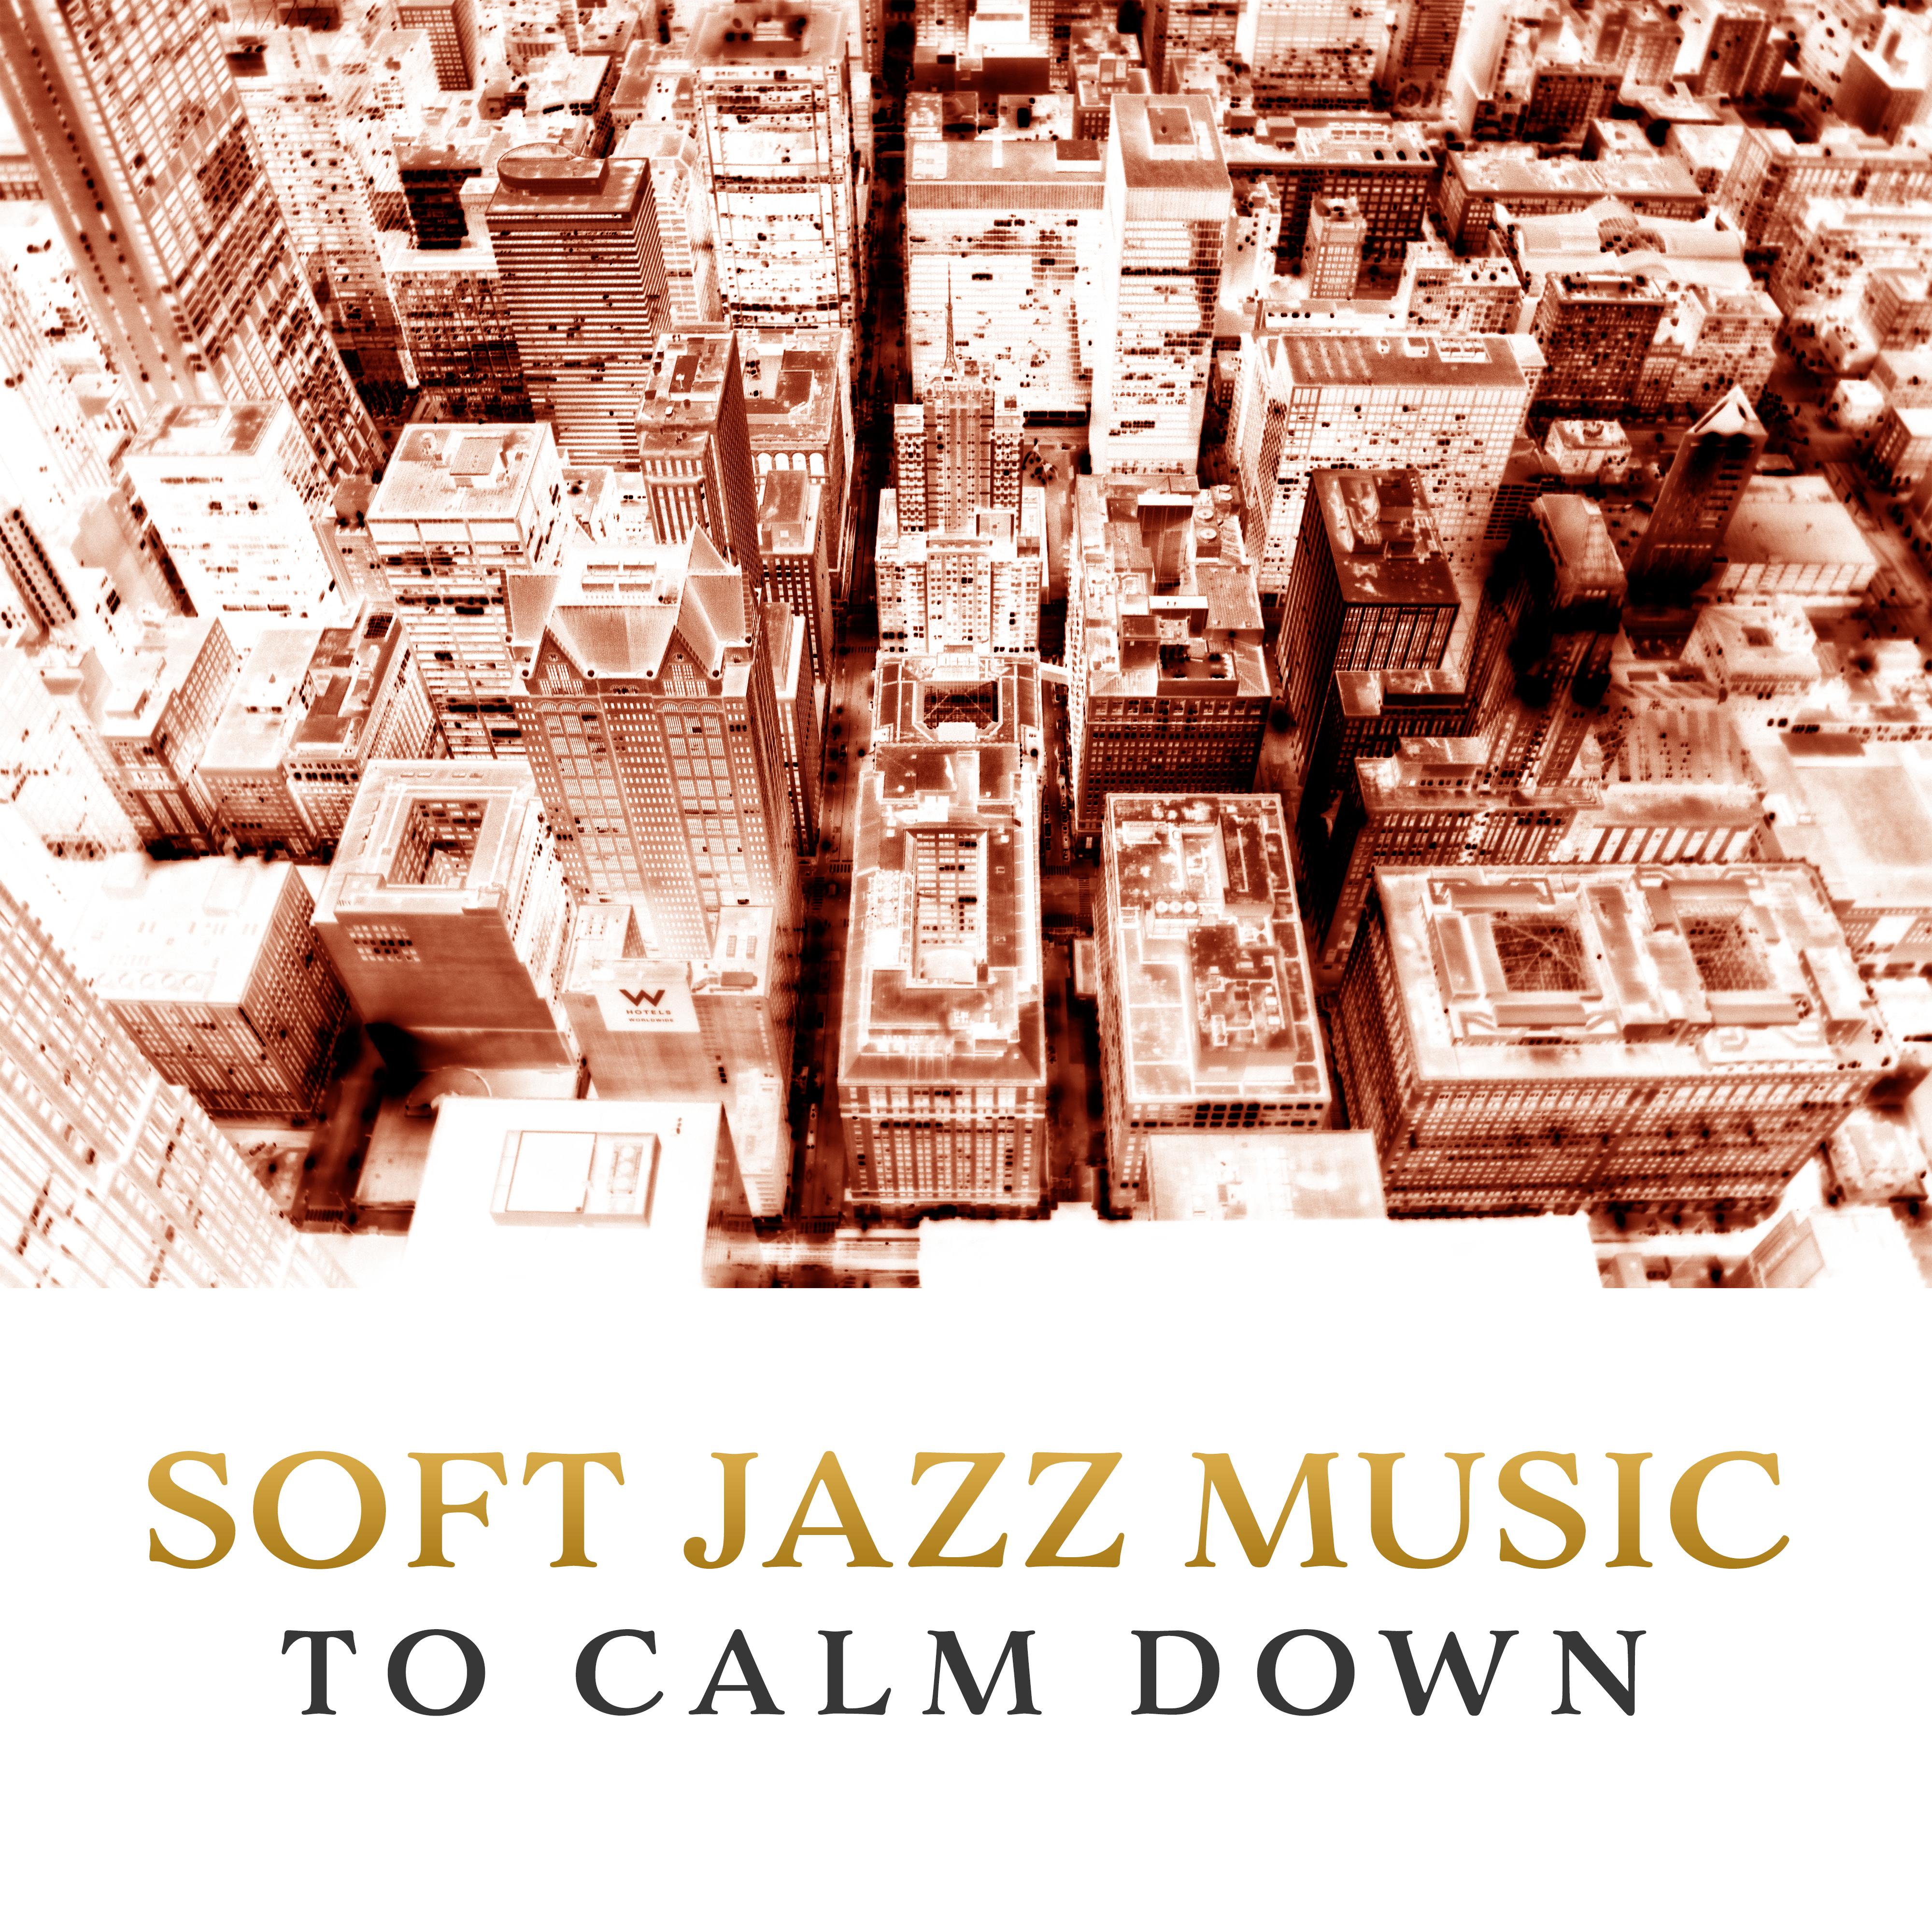 Soft Jazz Music to Calm Down  Easy Listening Jazz Music, Piano Relaxation, Instrumental Sounds to Rest